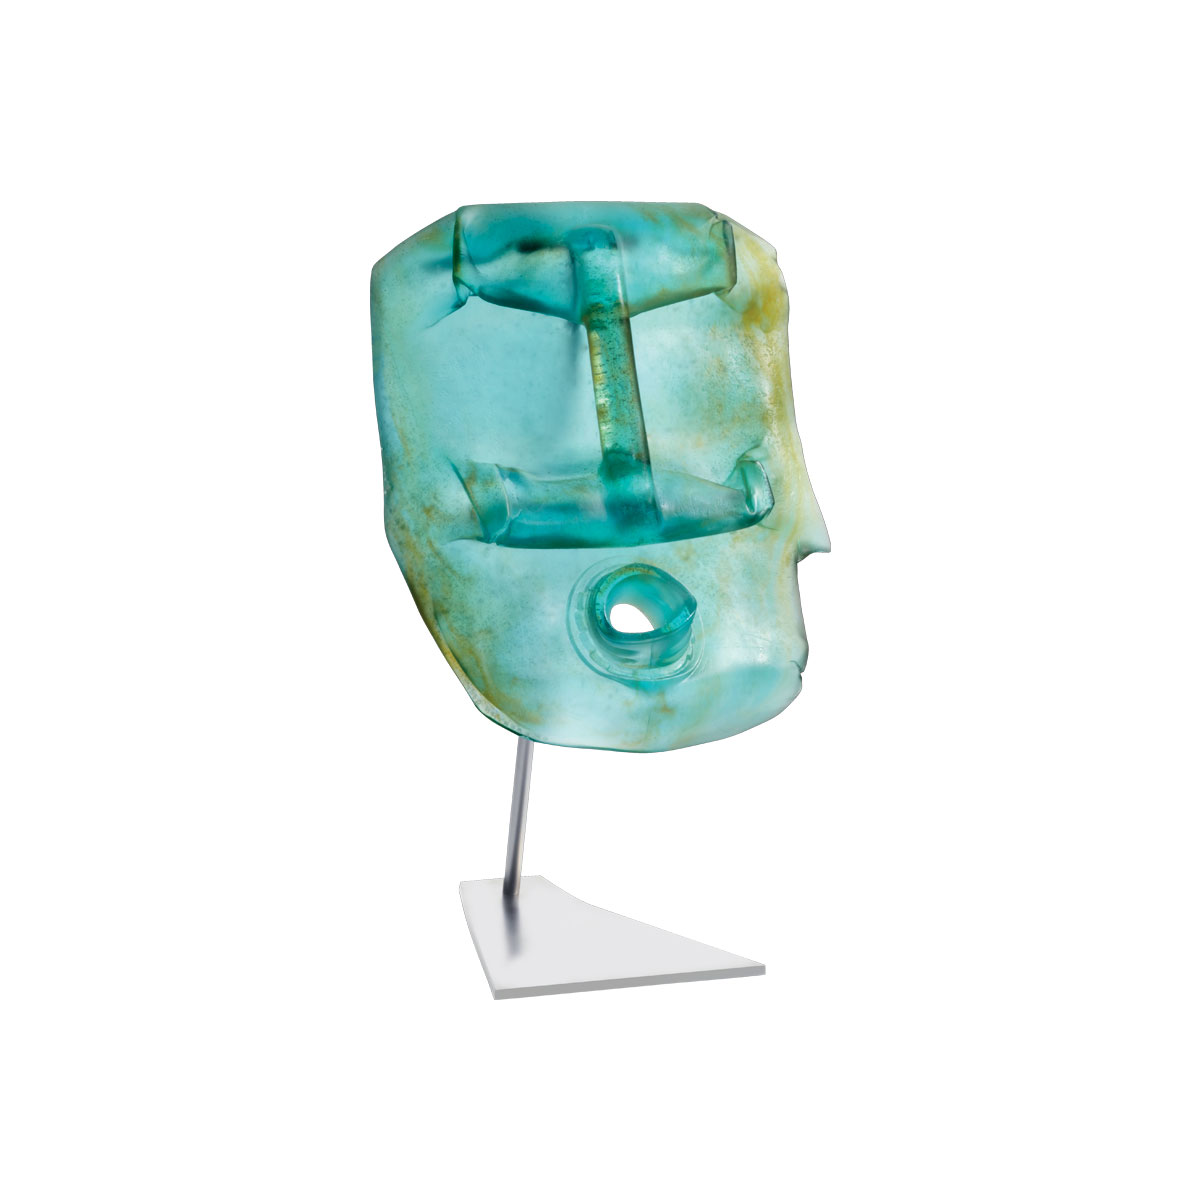 Daum Oil Head in Blue by Romuald Hazoume, Limited Edition Sculpture